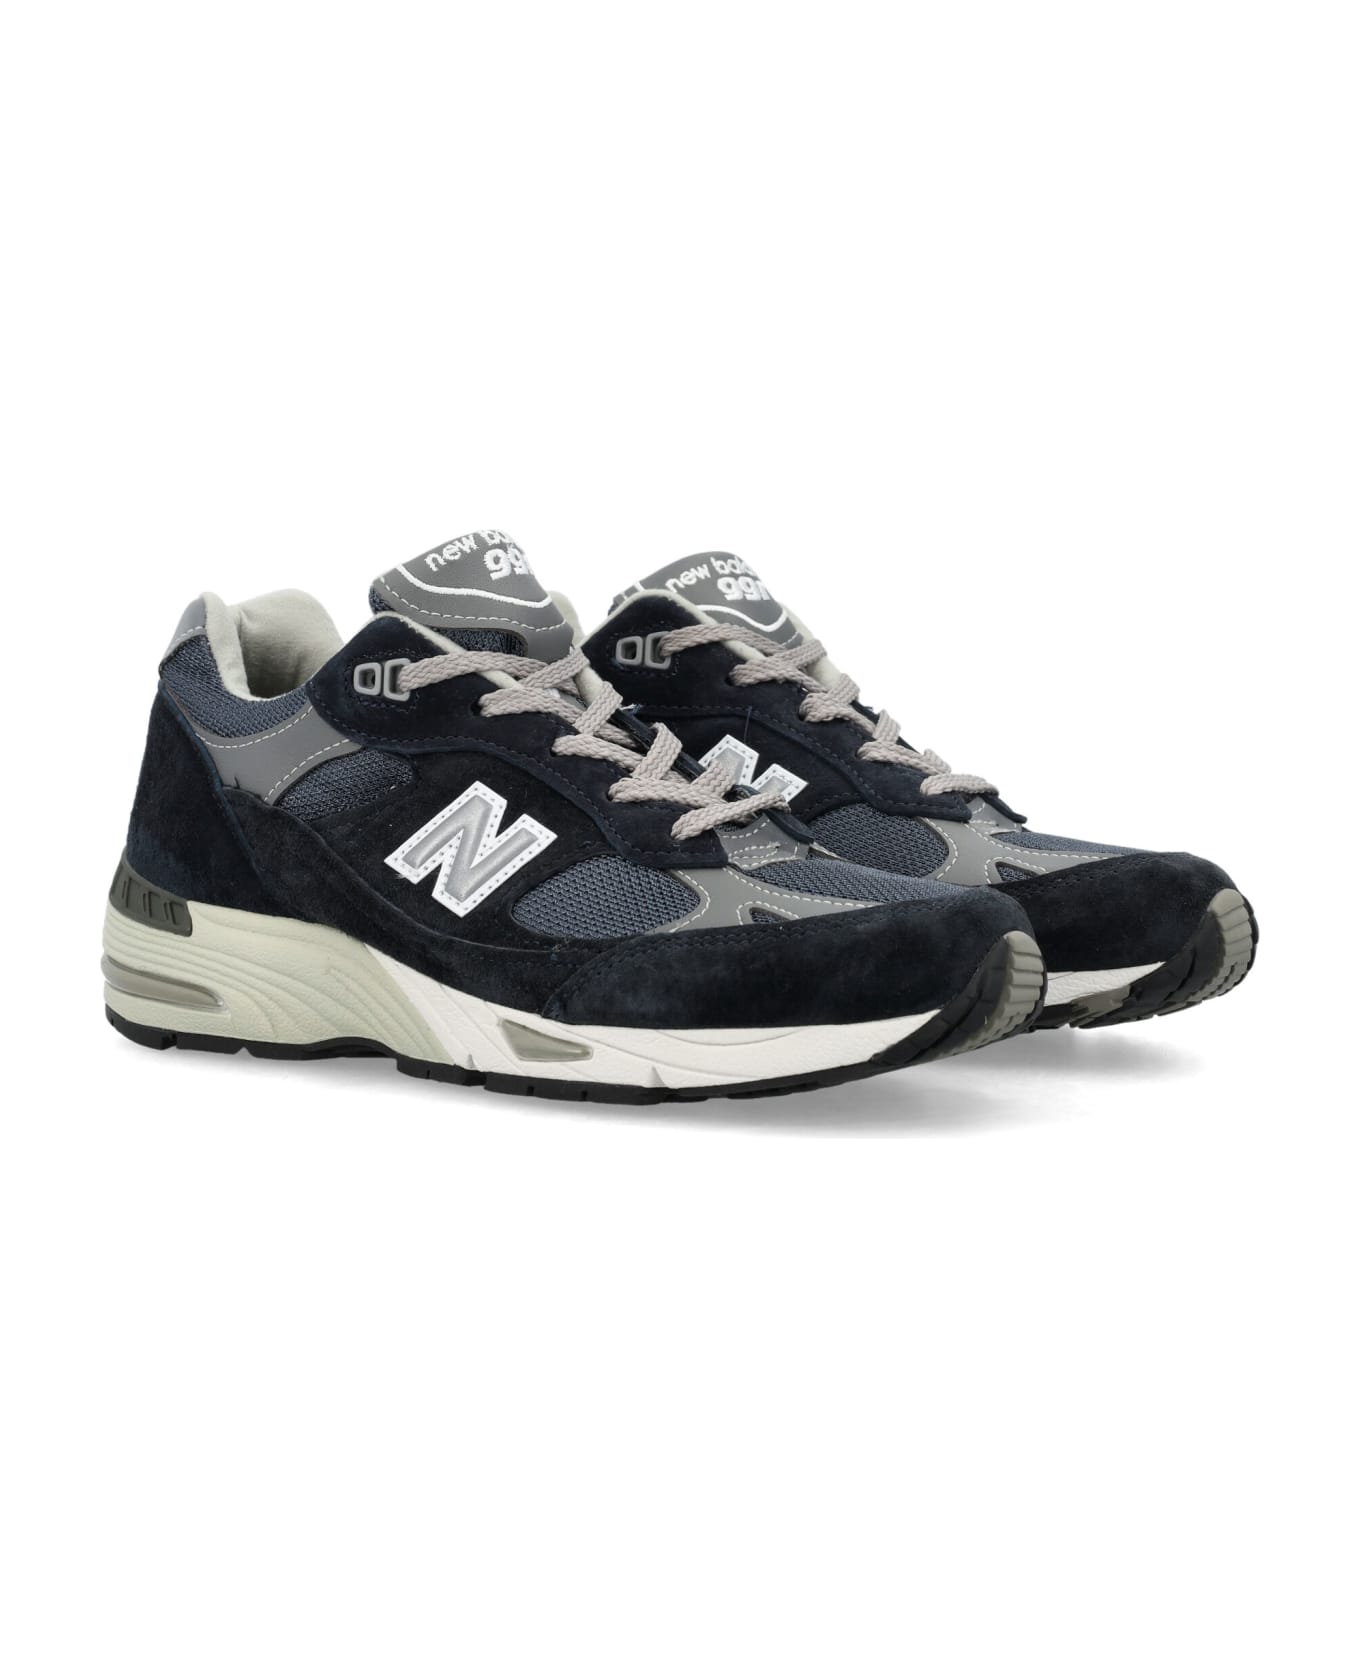 New Balance Made In Uk 991v1 Sneakers - NAVY